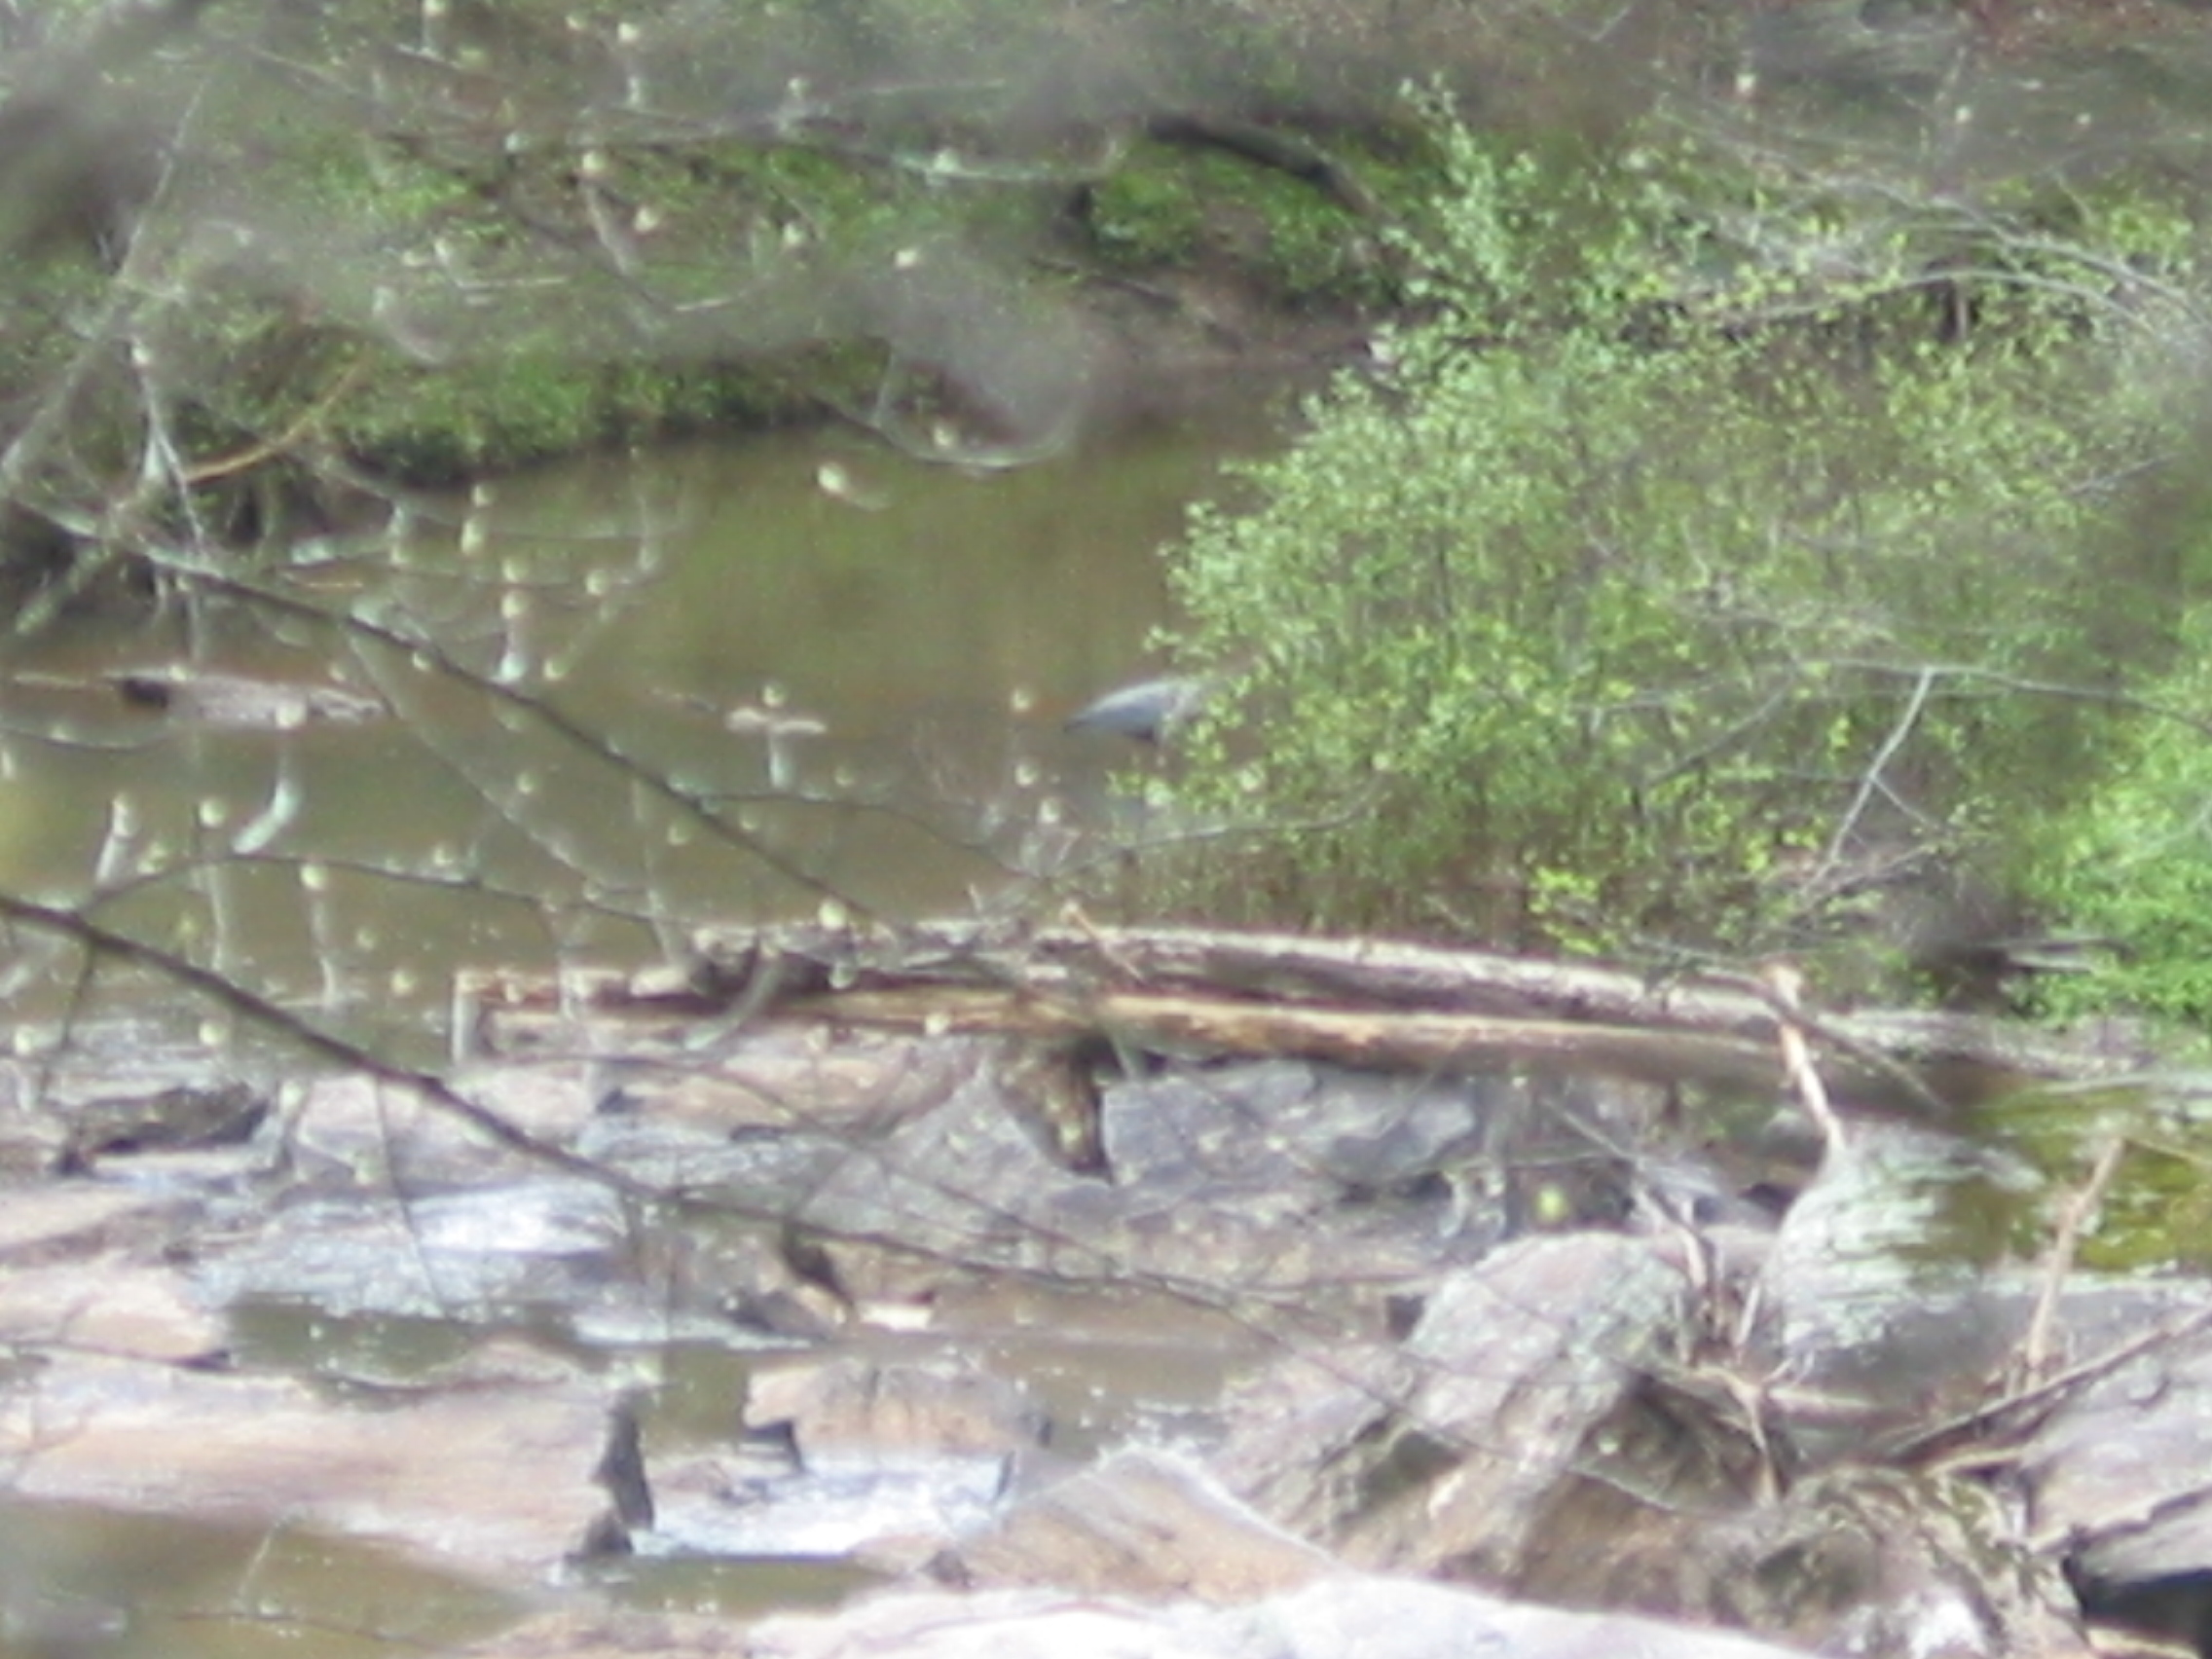 11x digital zoom; attempting to get a great blue heron